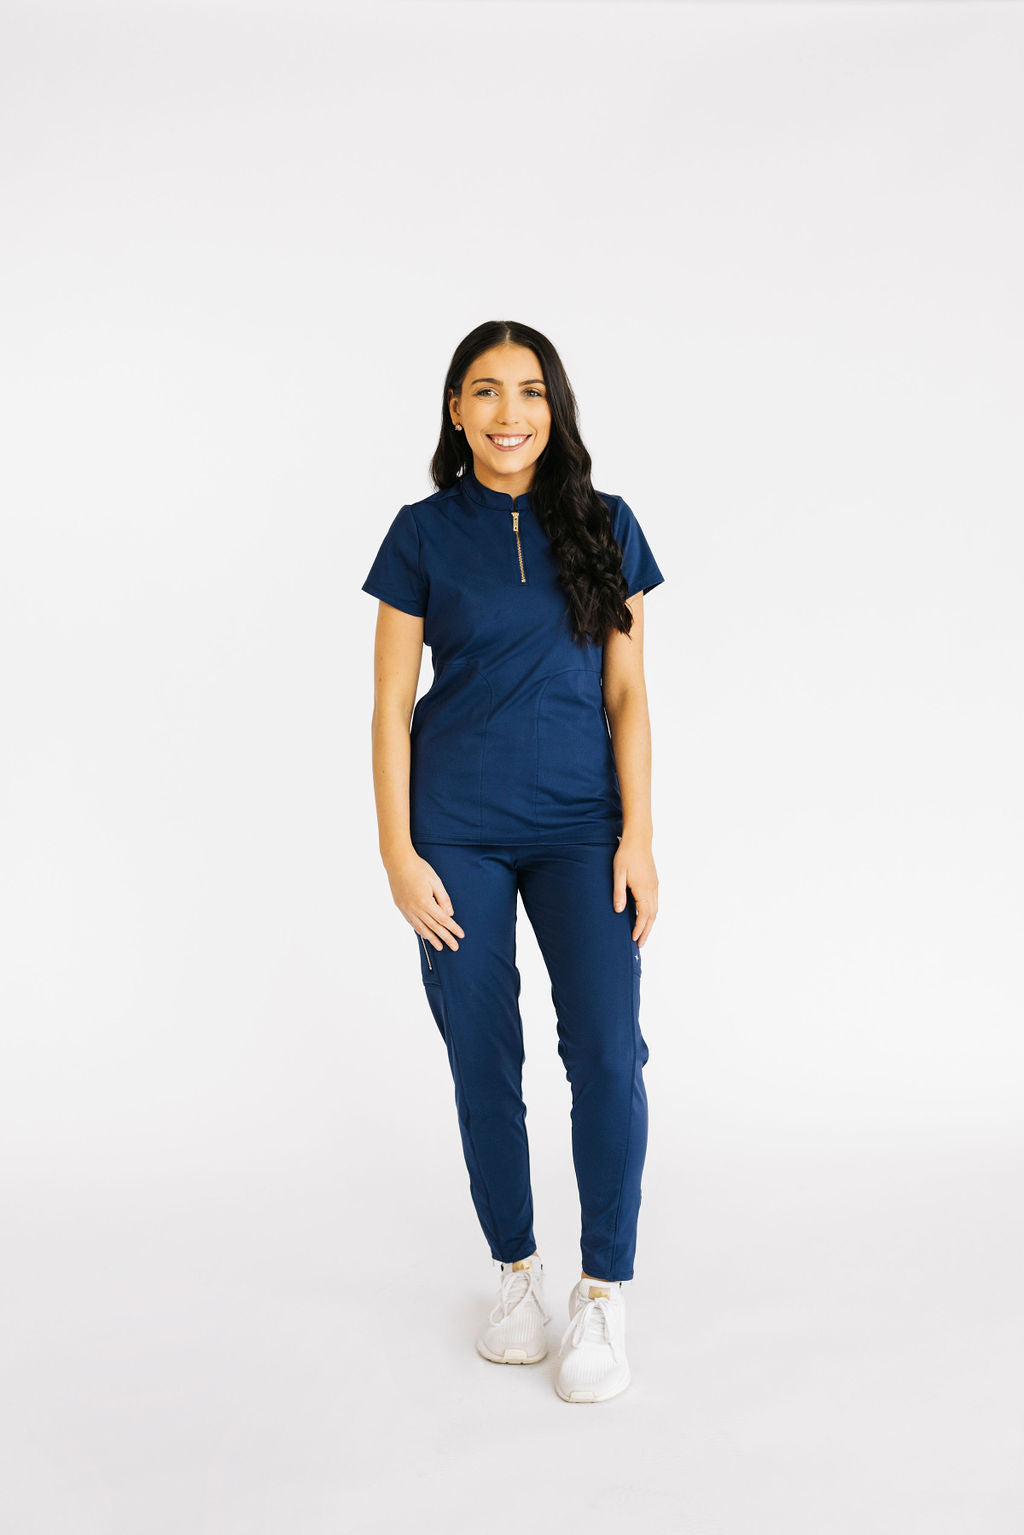 fitted scrubs for women